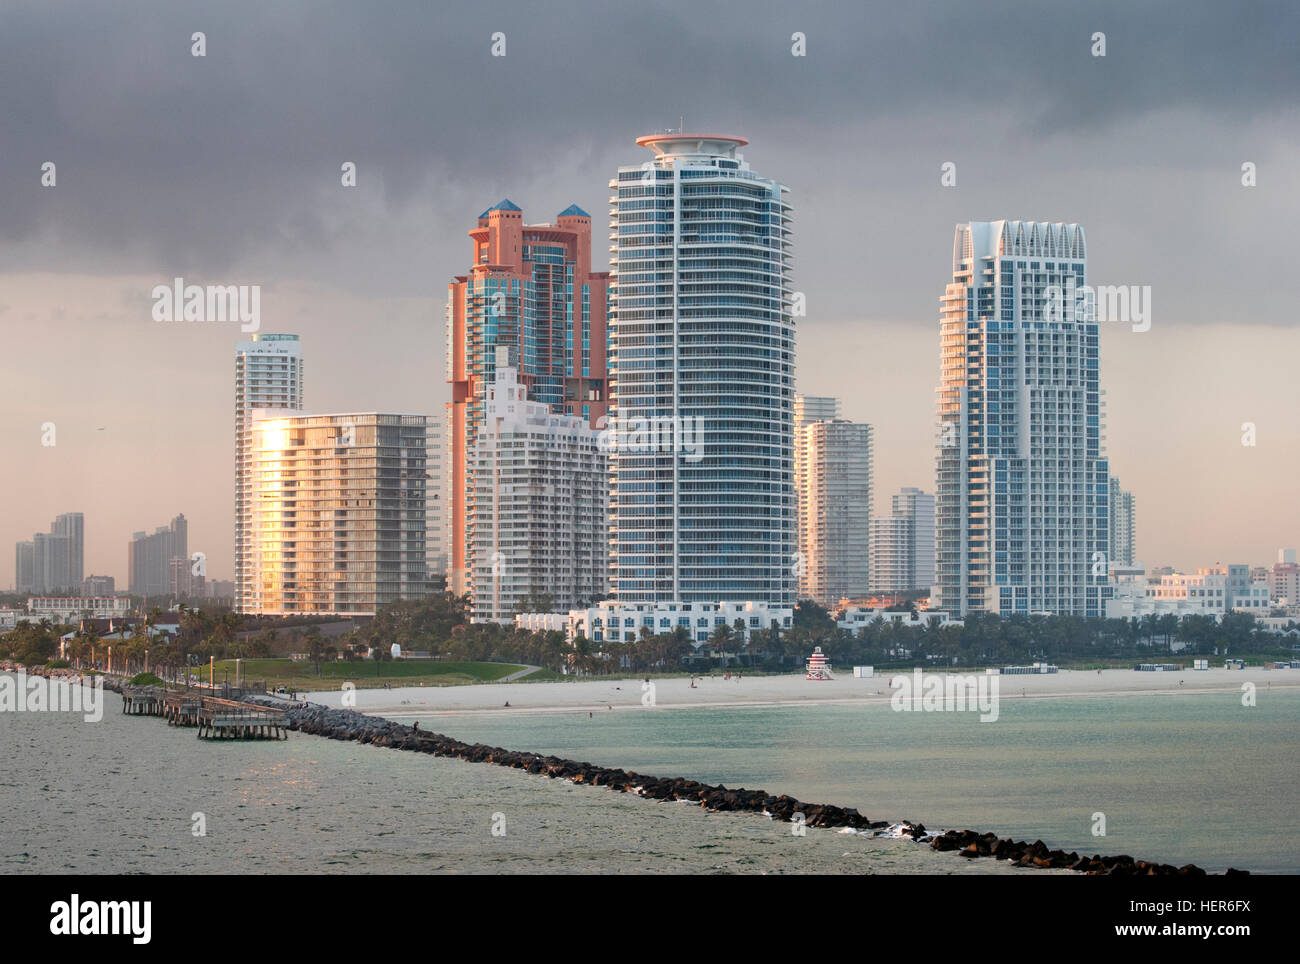 The view of South Pointe Beach in a sunset light (Miami, Florida). Stock Photo